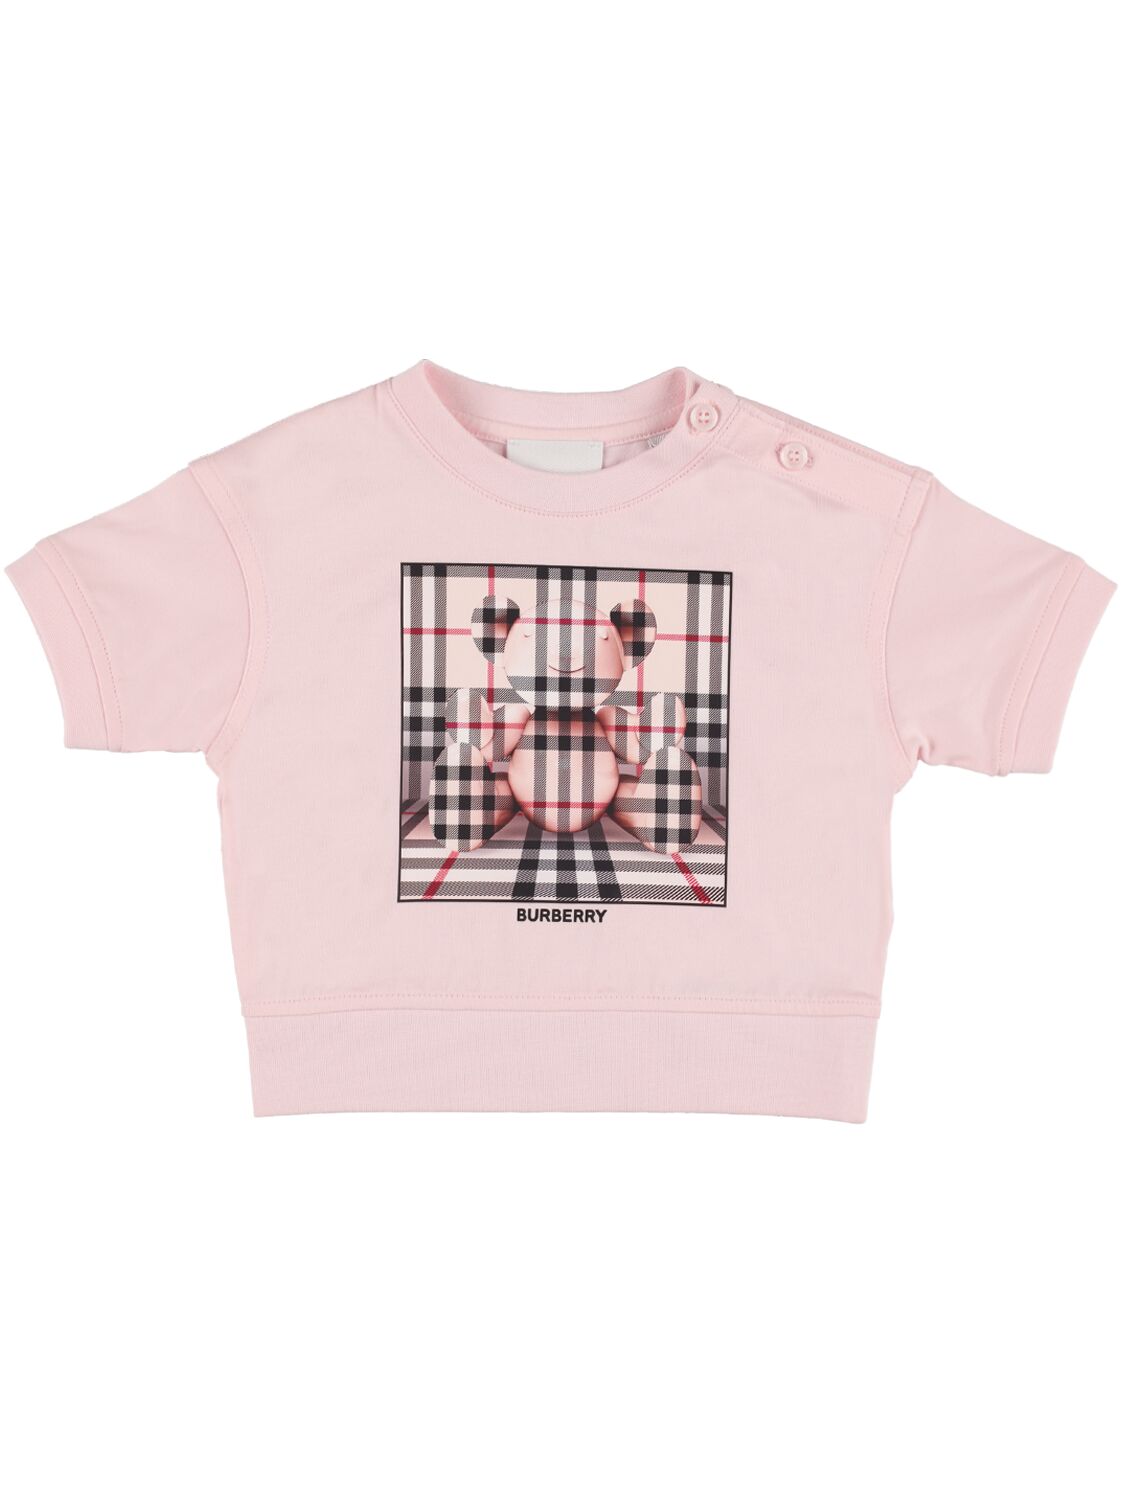 Burberry Kids' Printed Cotton Jersey T-shirt W/logo In Pink